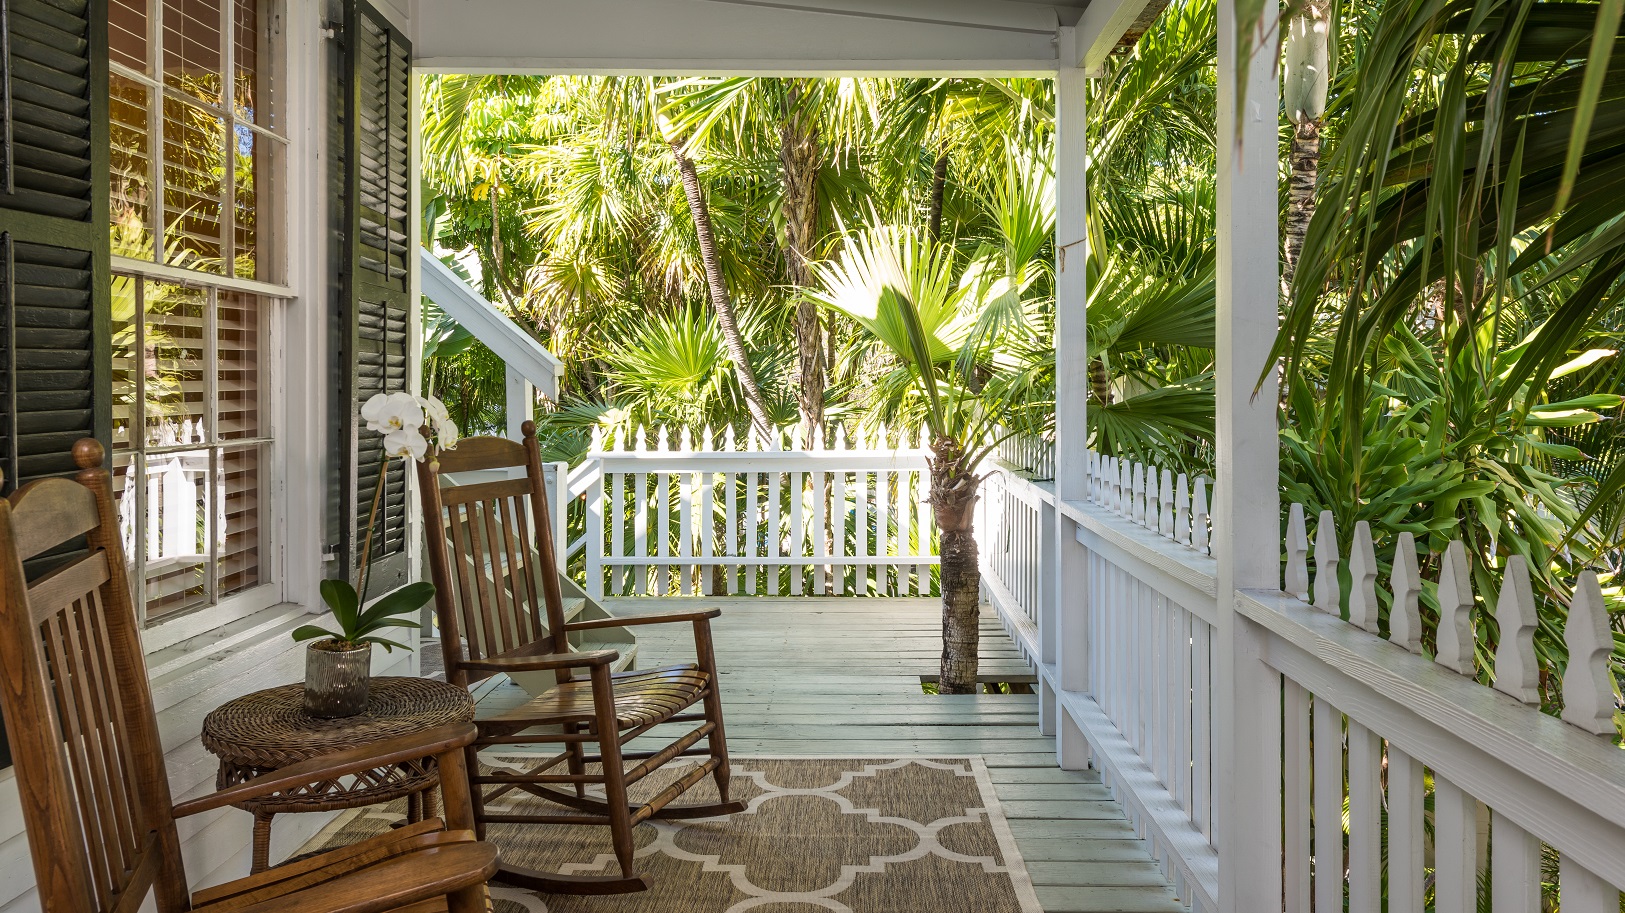 Romantic Sunset Room in Key West FL - Sunset Room at Old Town Manor